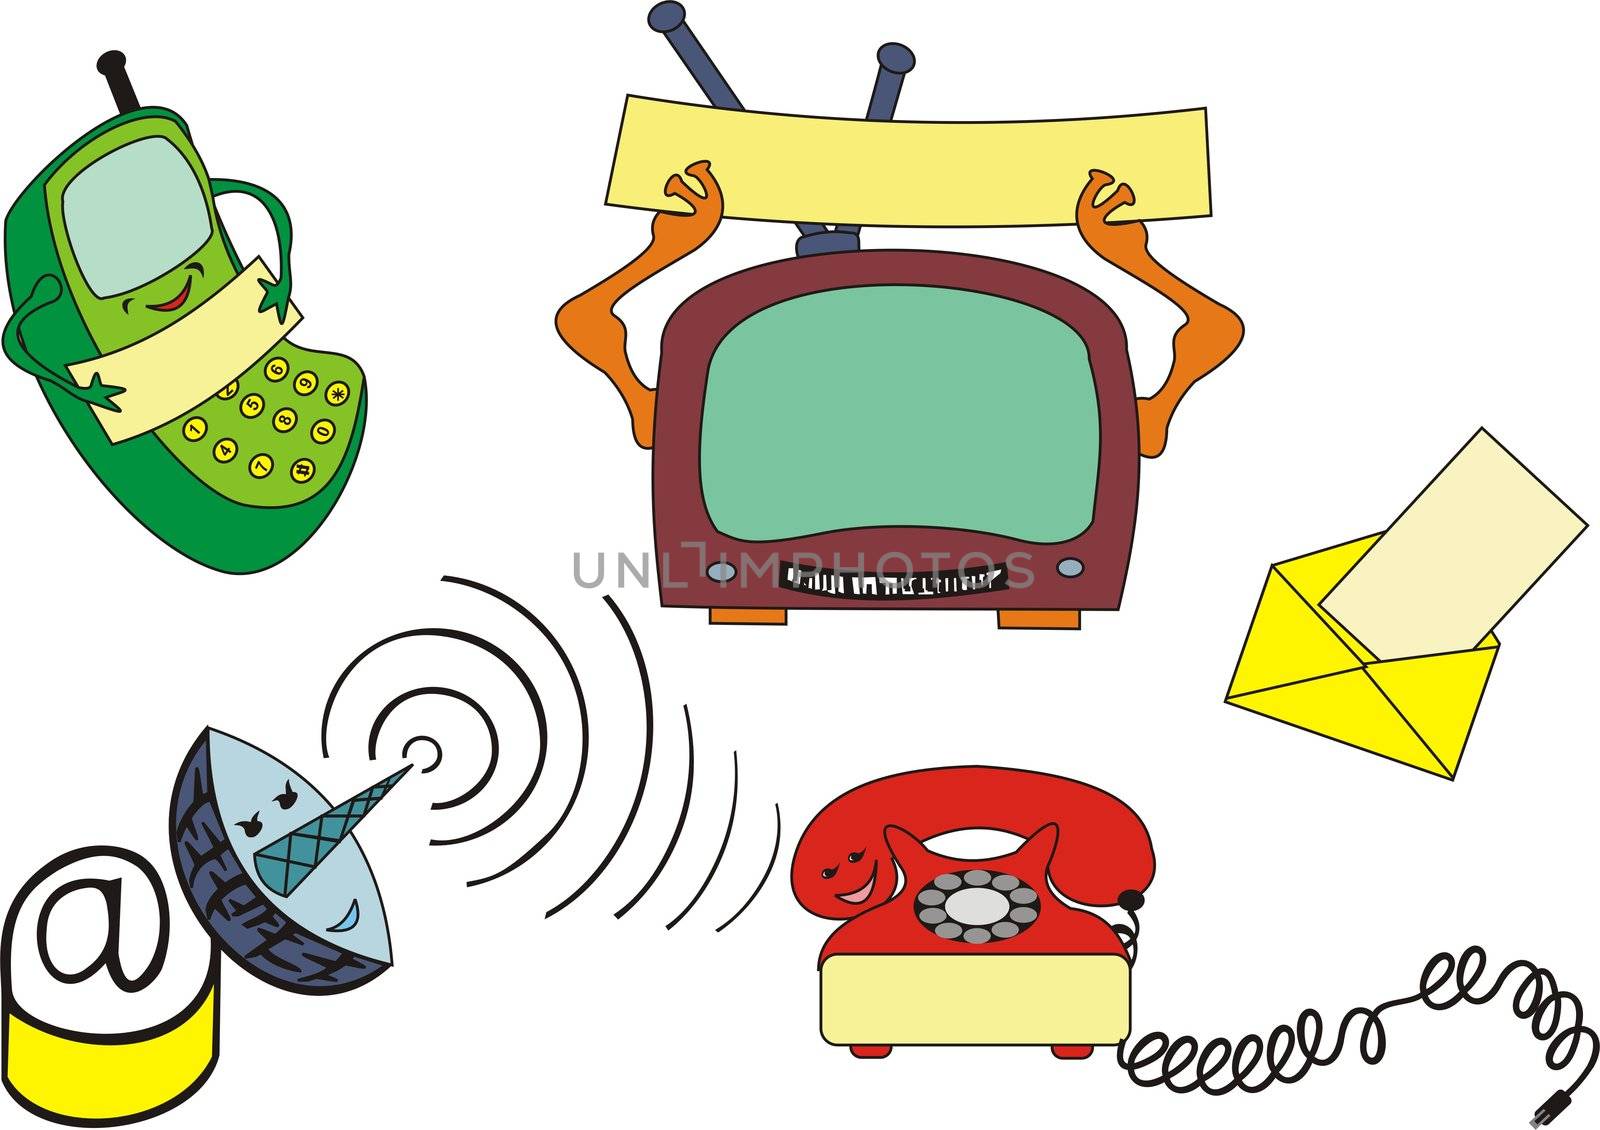 communication devices, cartoon style